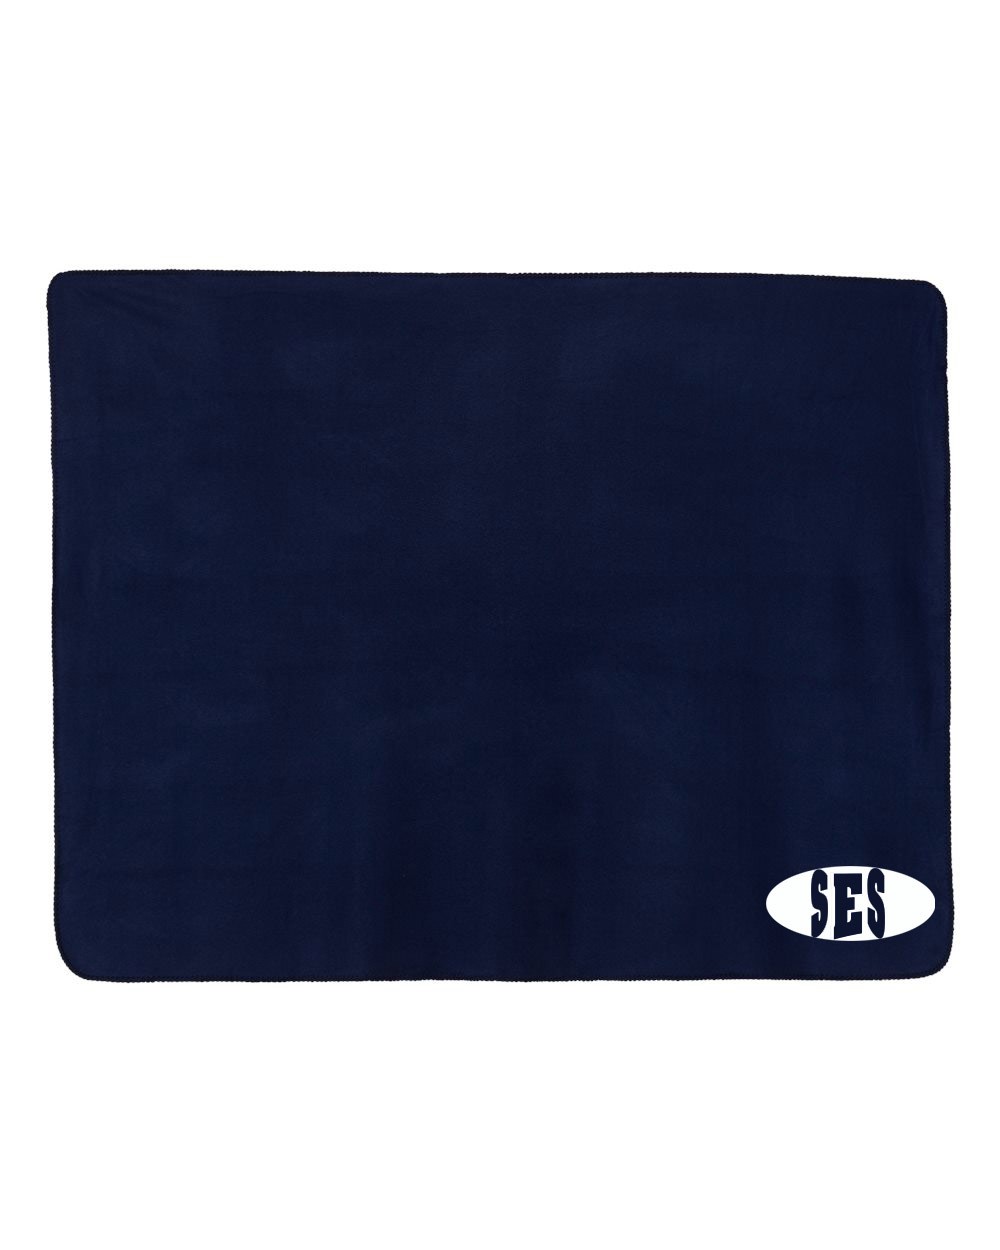 SES Spirit Fleece Throw Blanket - Please Allow 2-3 Weeks for Delivery